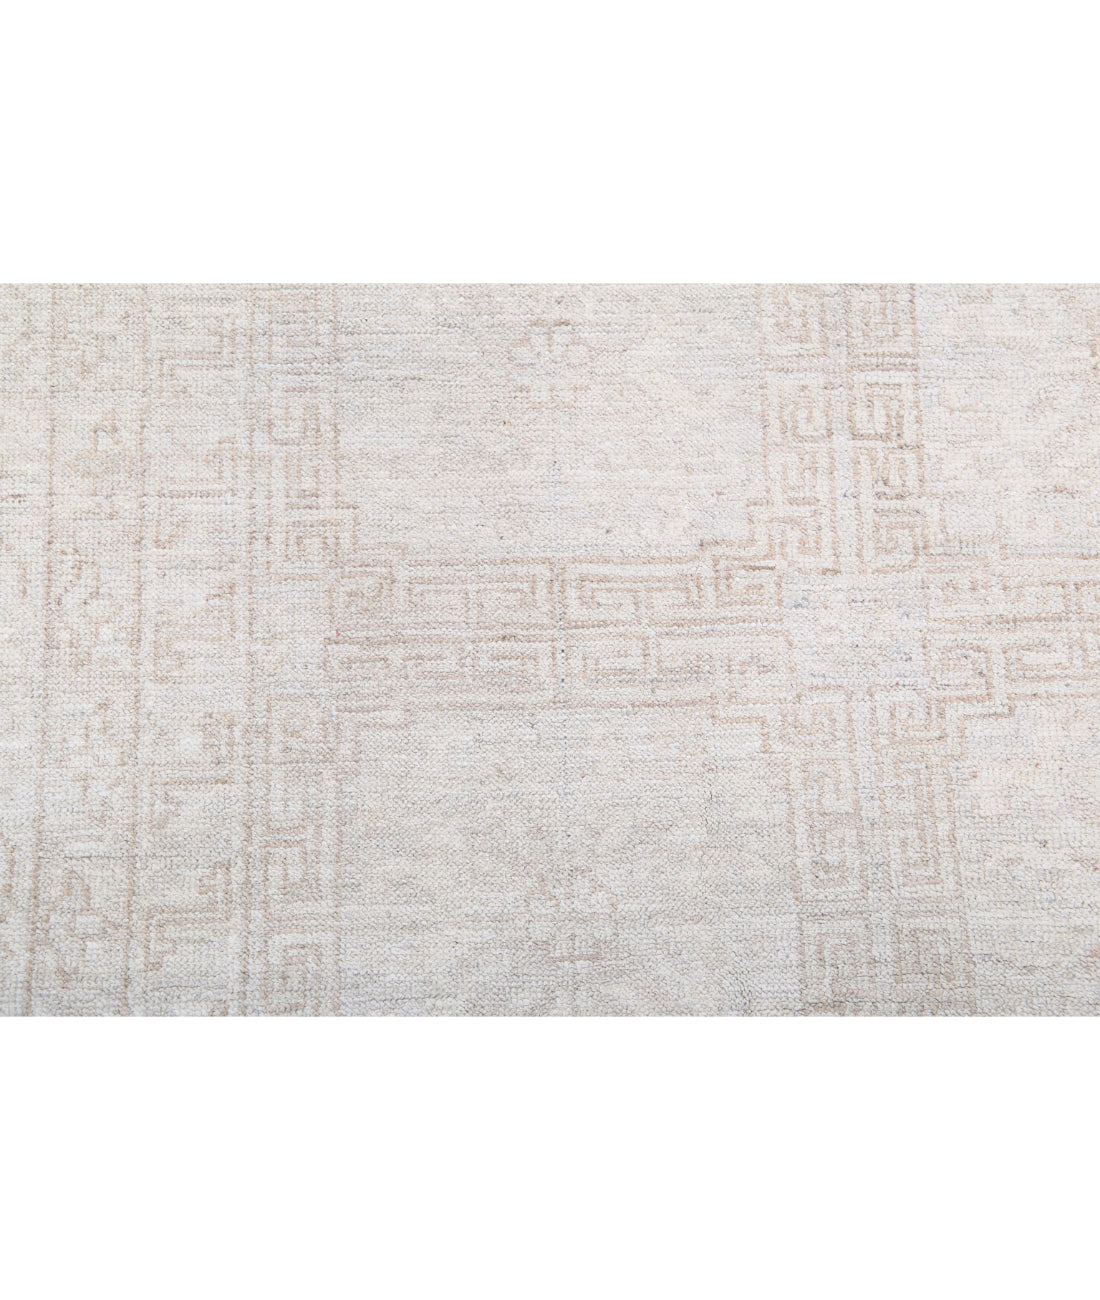 Hand Knotted Khotan Wool Rug - 3'10'' x 11'10'' 3'10'' x 11'10'' (115 X 355) / Ivory / Taupe